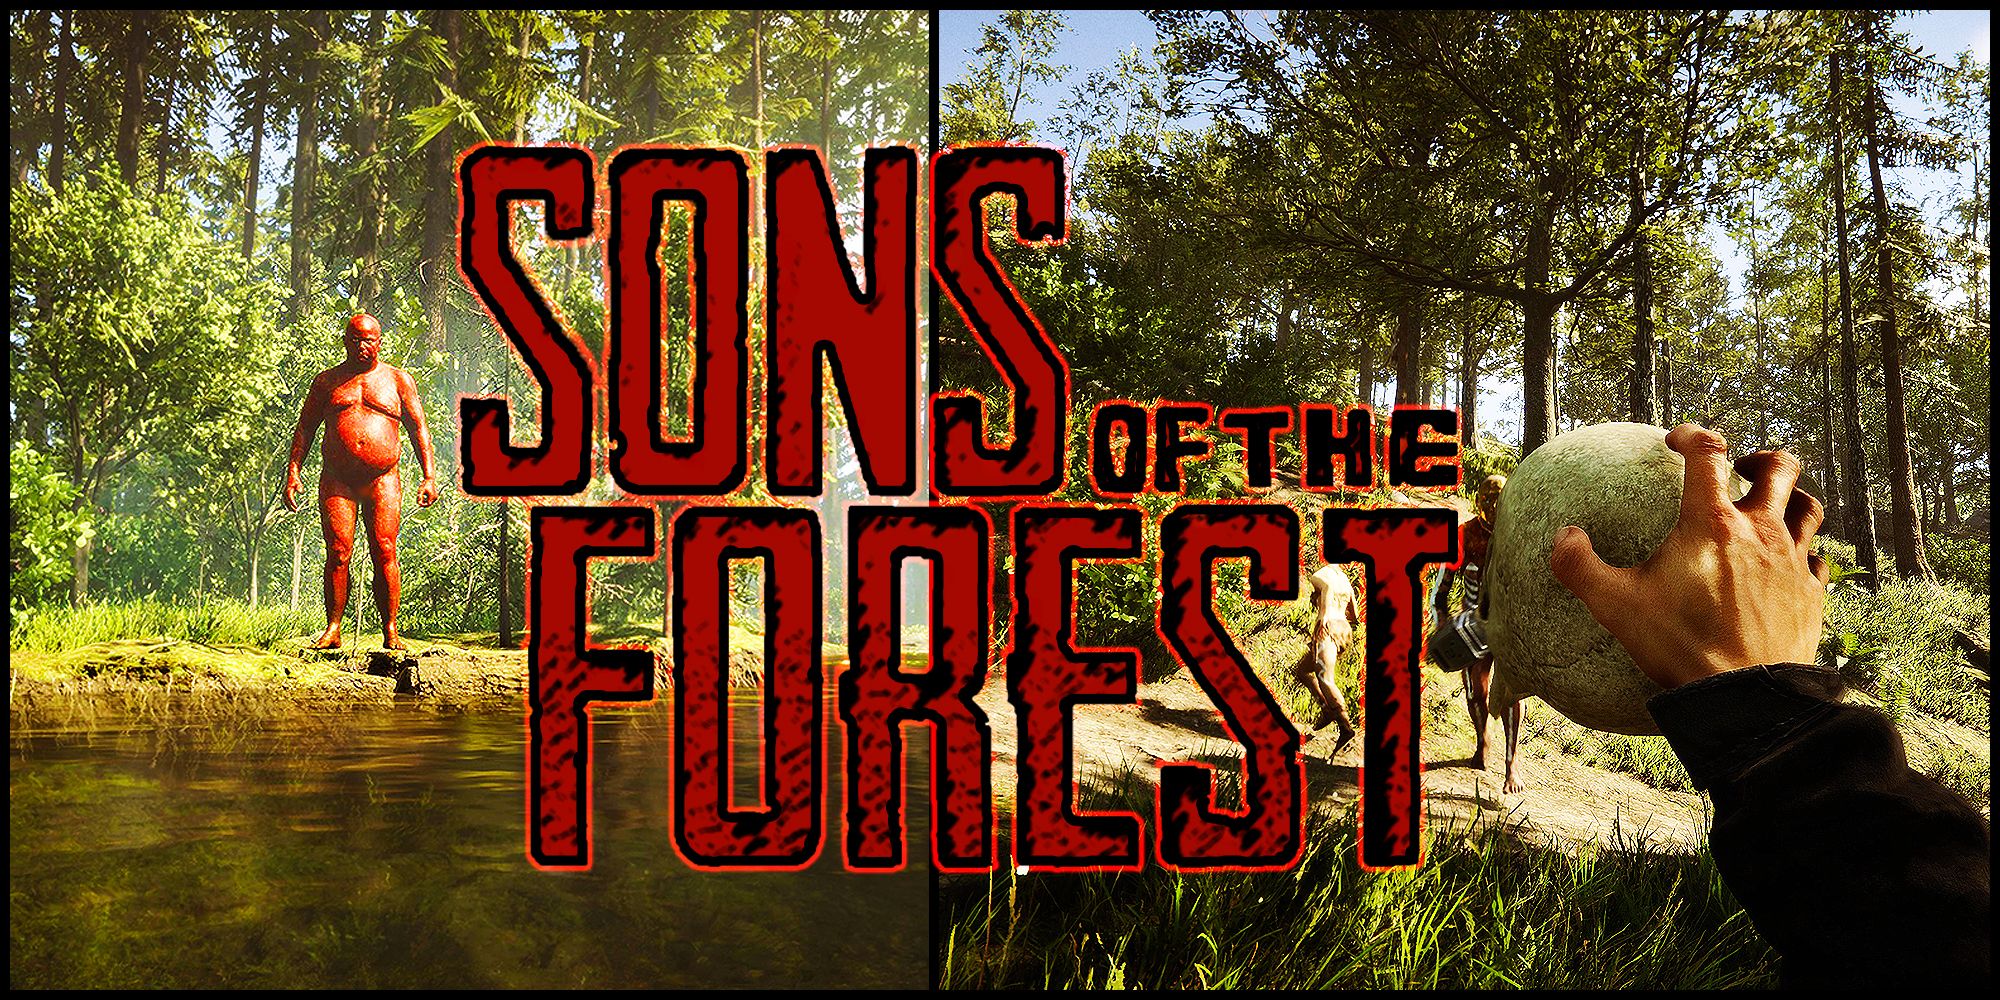 How to get the shovel in Sons of the Forest